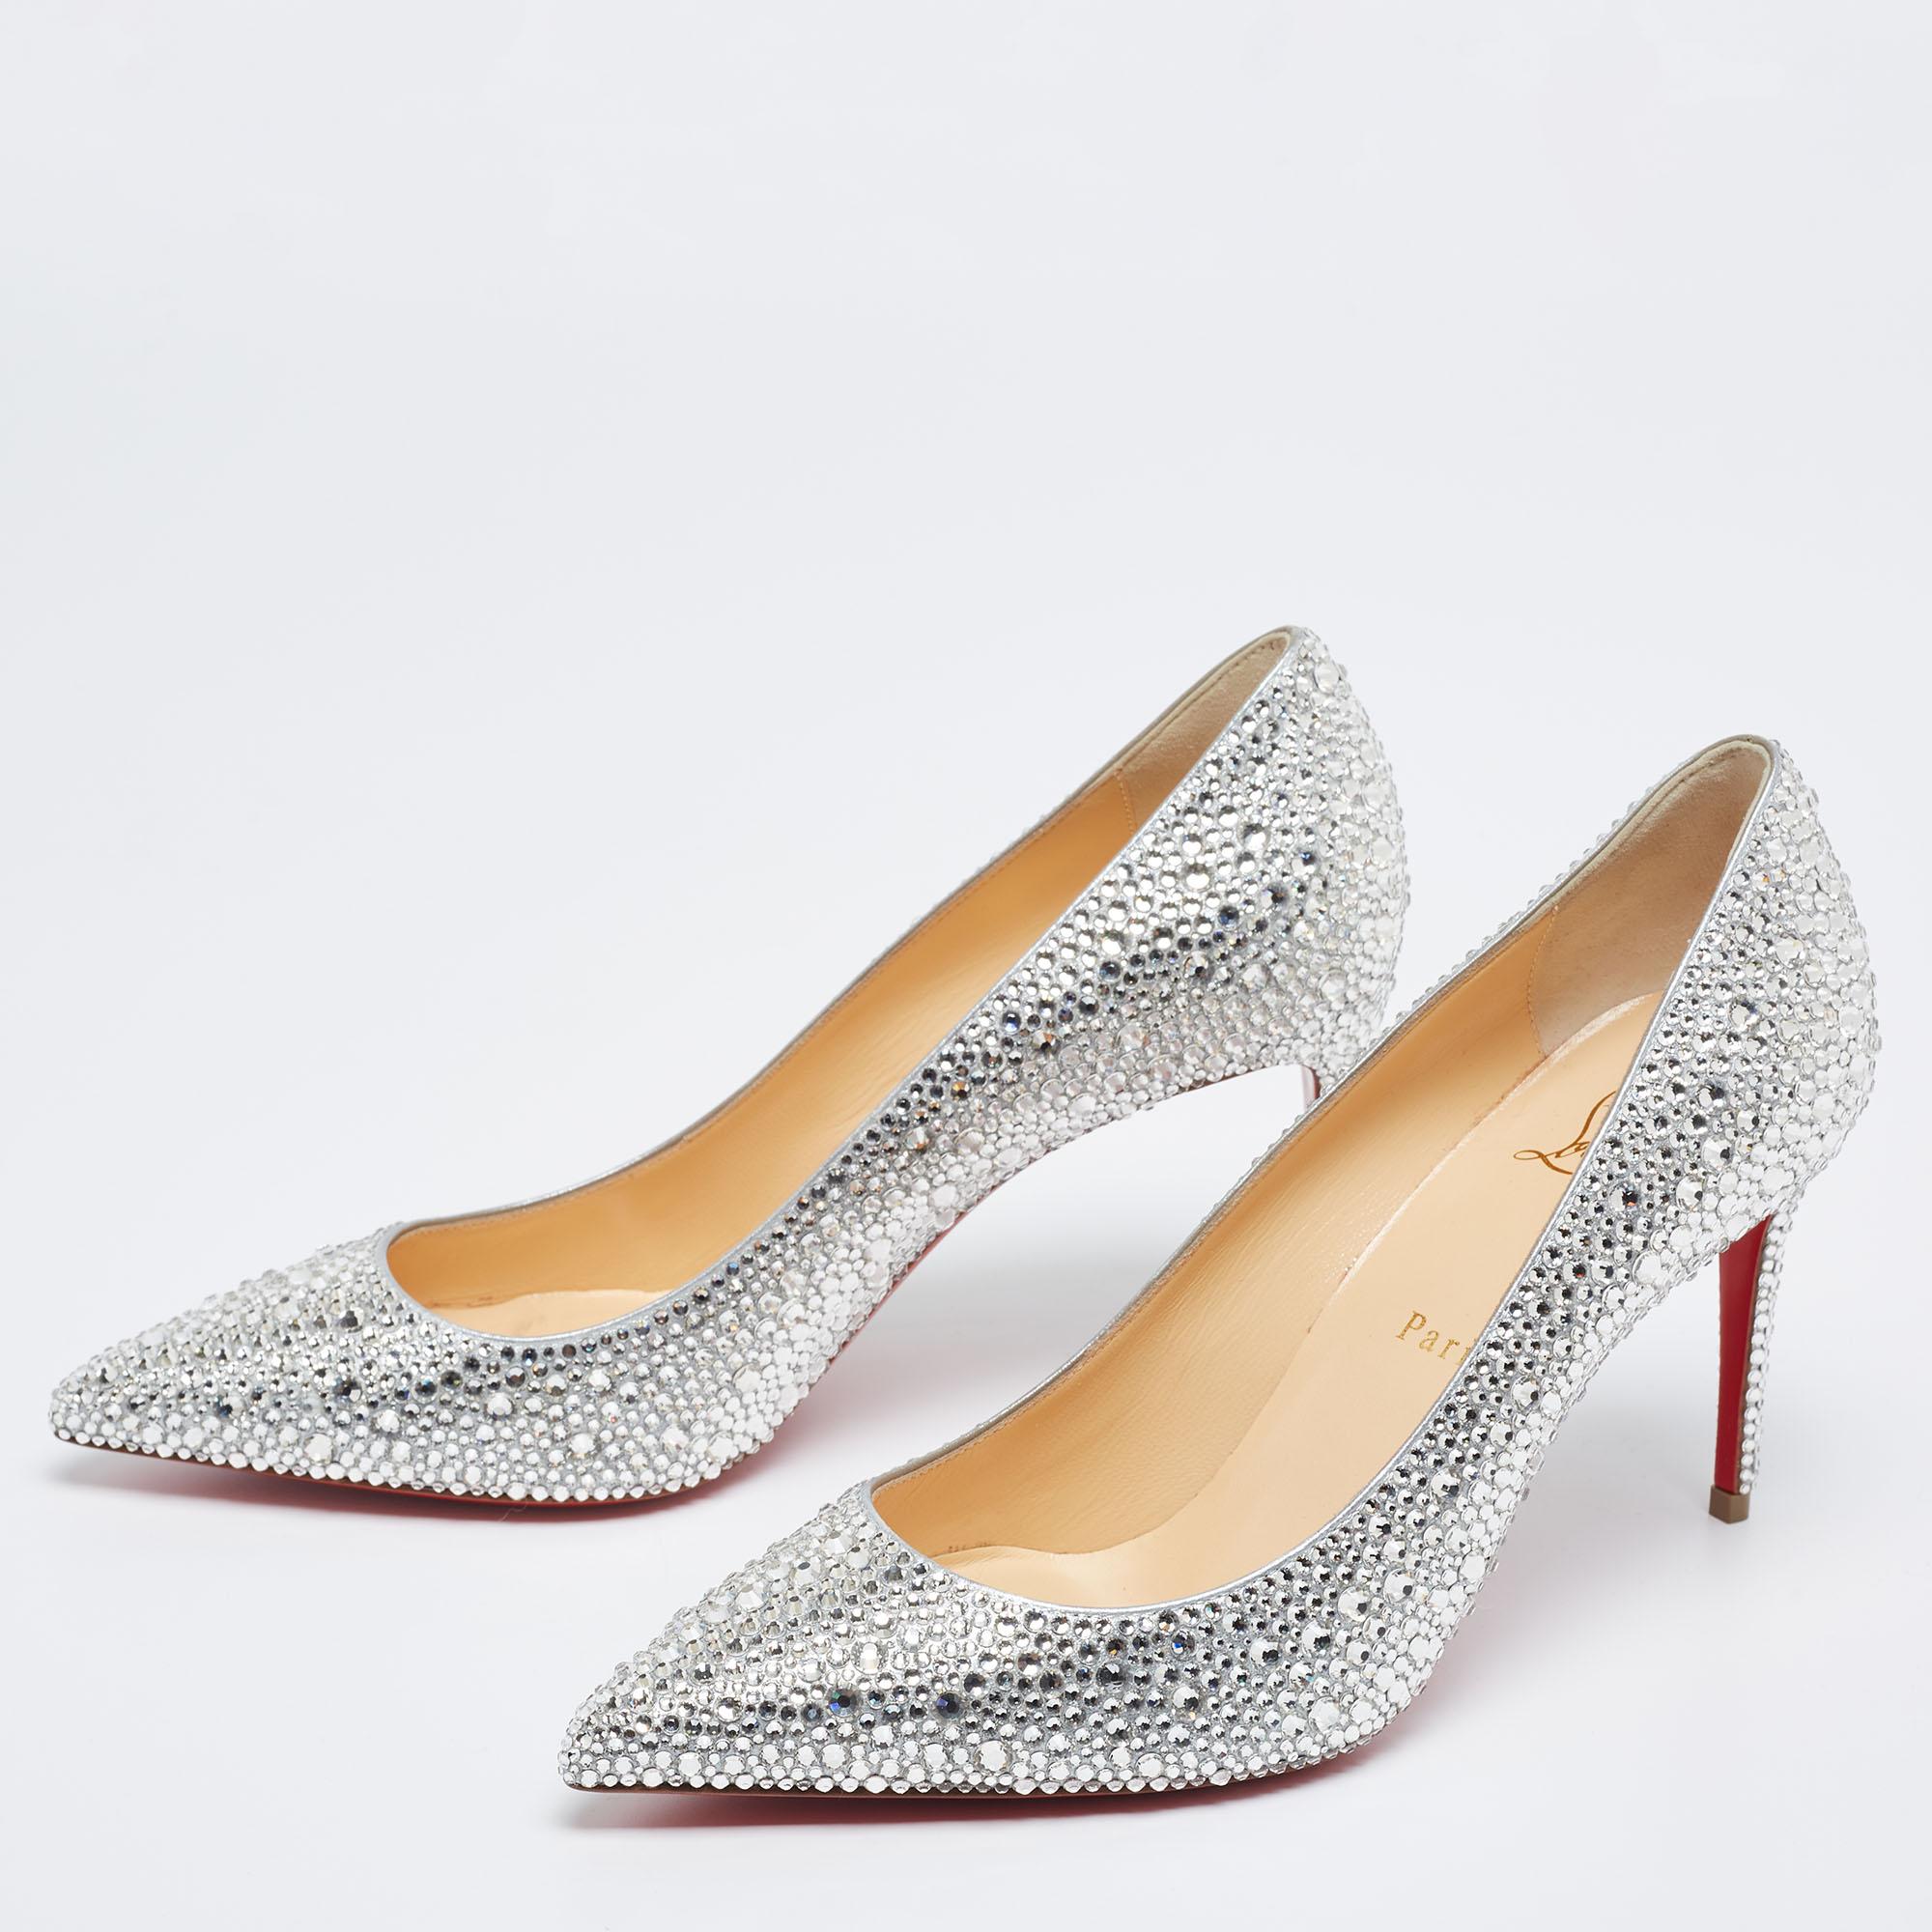 How brilliantly stunning are these Christian Louboutin pumps! They have been made using leather and flaunt a shimmering silver hue on the exterior. They are finished with smooth insoles and slender 8.5 cm heels. Flaunt them at the next